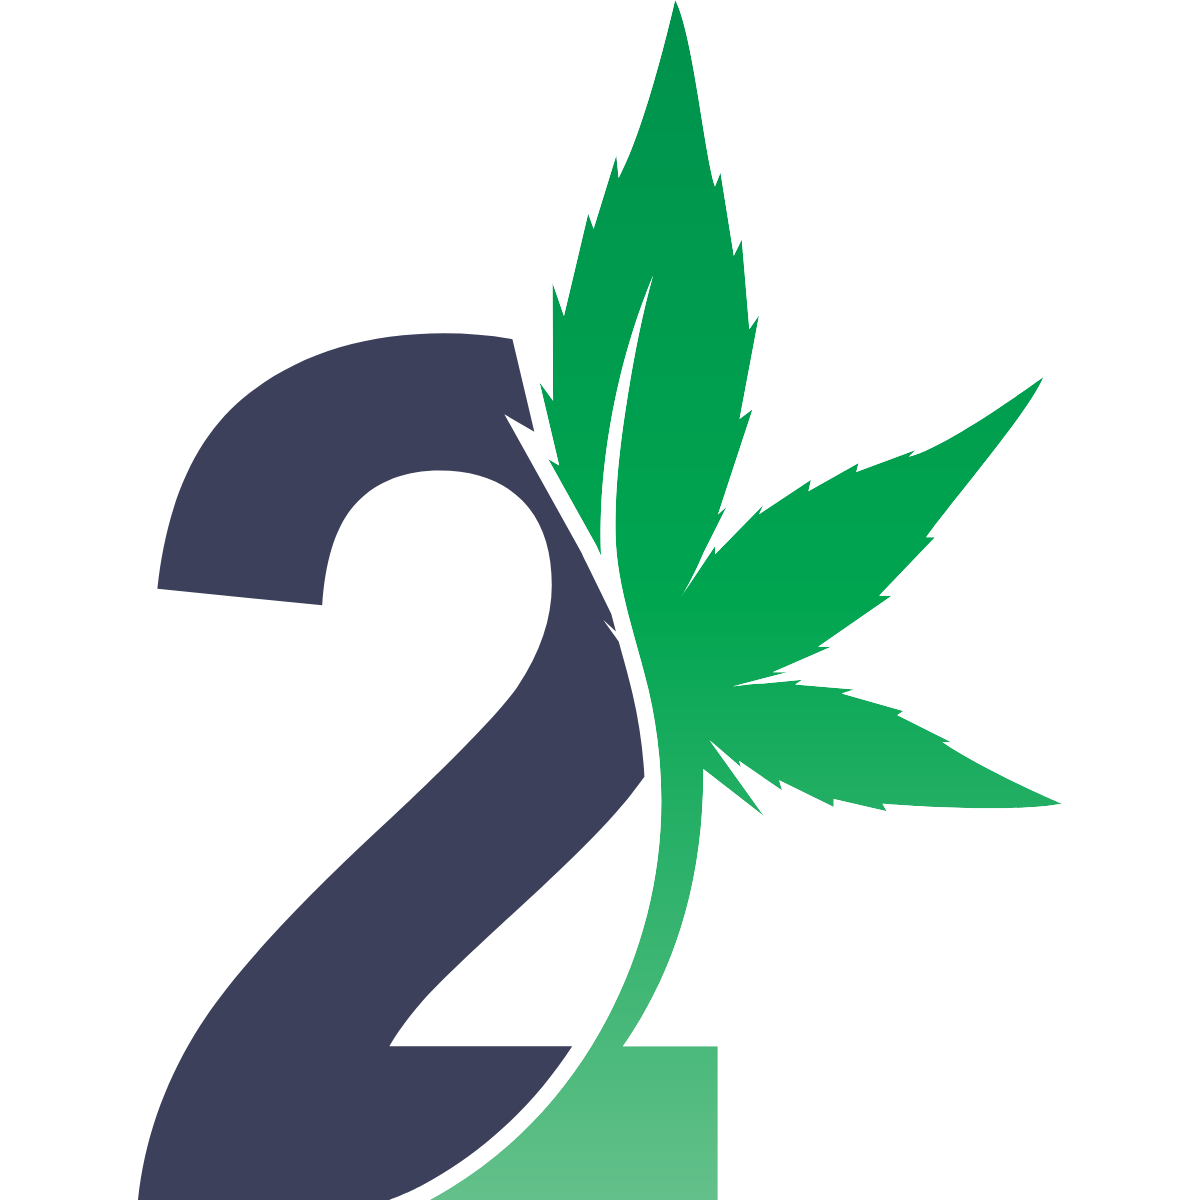 The number two fused with a cannabis leaf